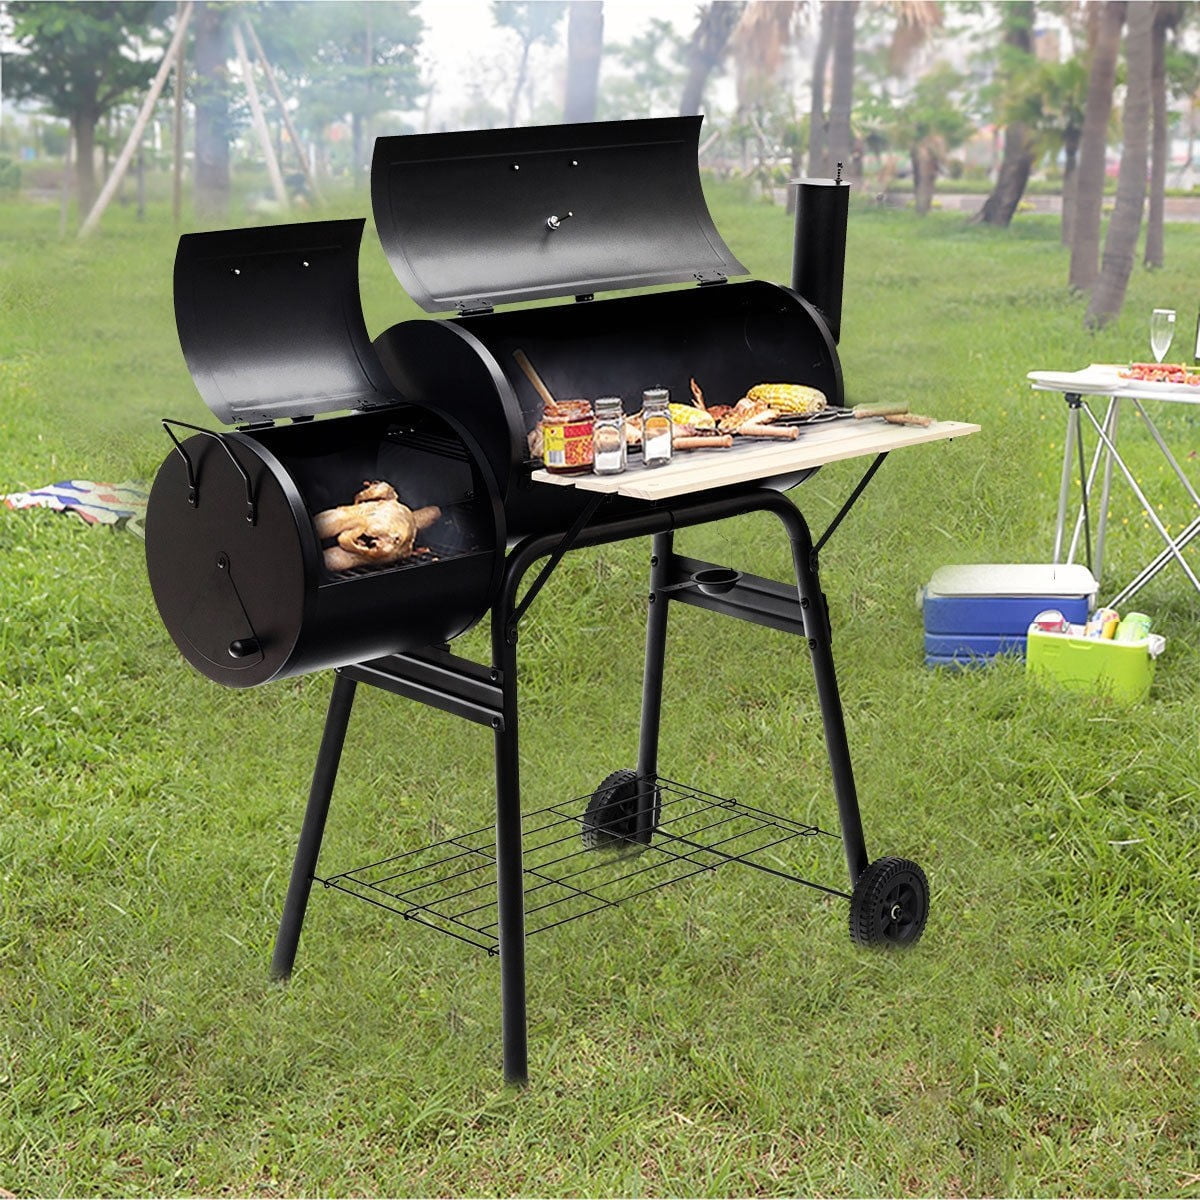 Outdoor BBQ Grill Barbecue Pit Patio Cooker Black - Walmart.com